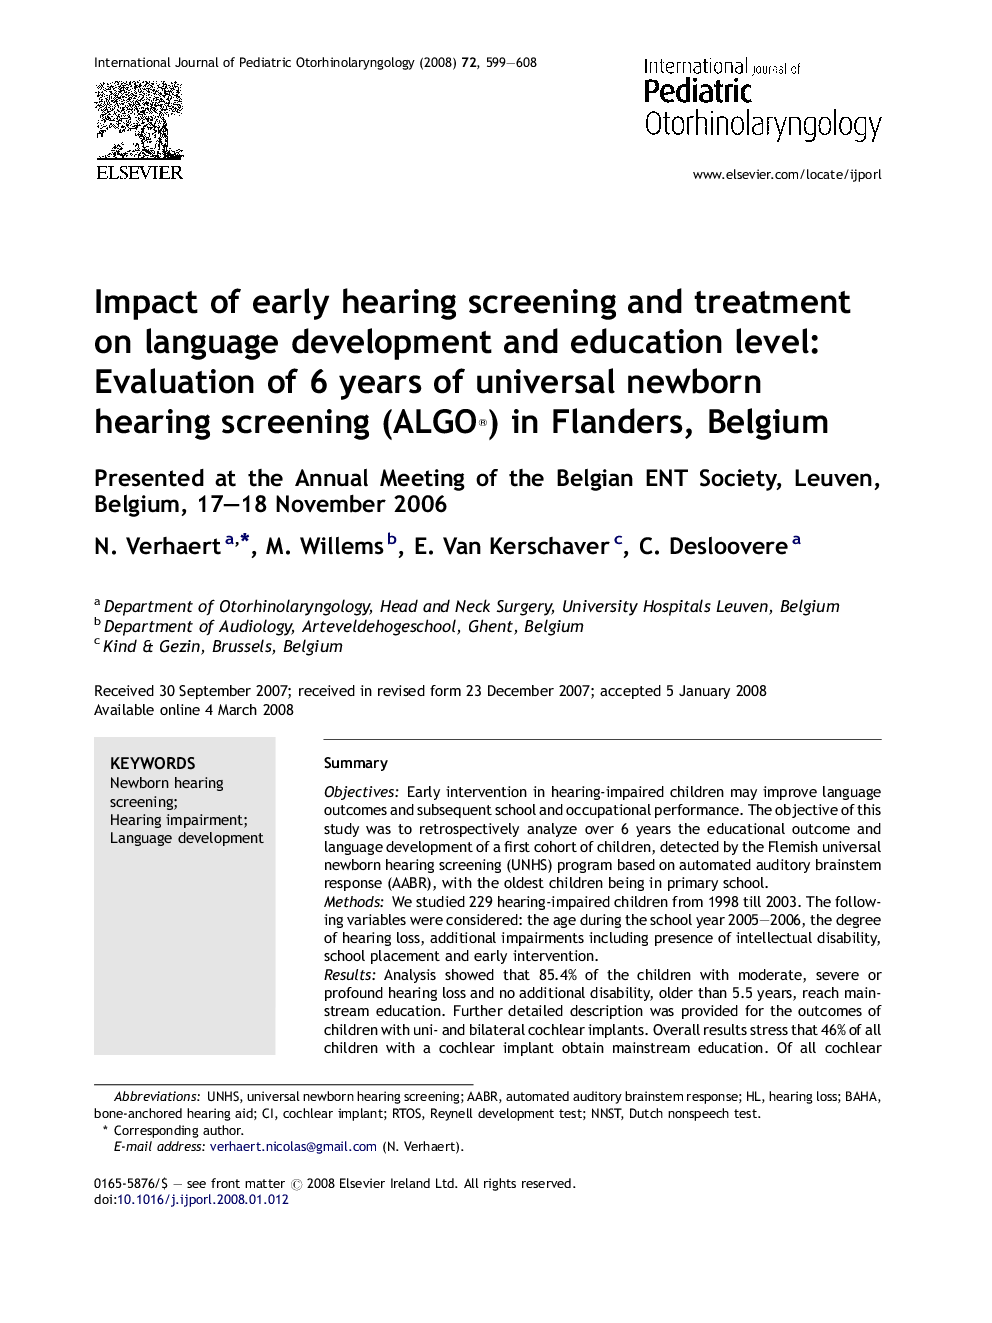 Impact of early hearing screening and treatment on language development and education level: Evaluation of 6 years of universal newborn hearing screening (ALGO®) in Flanders, Belgium